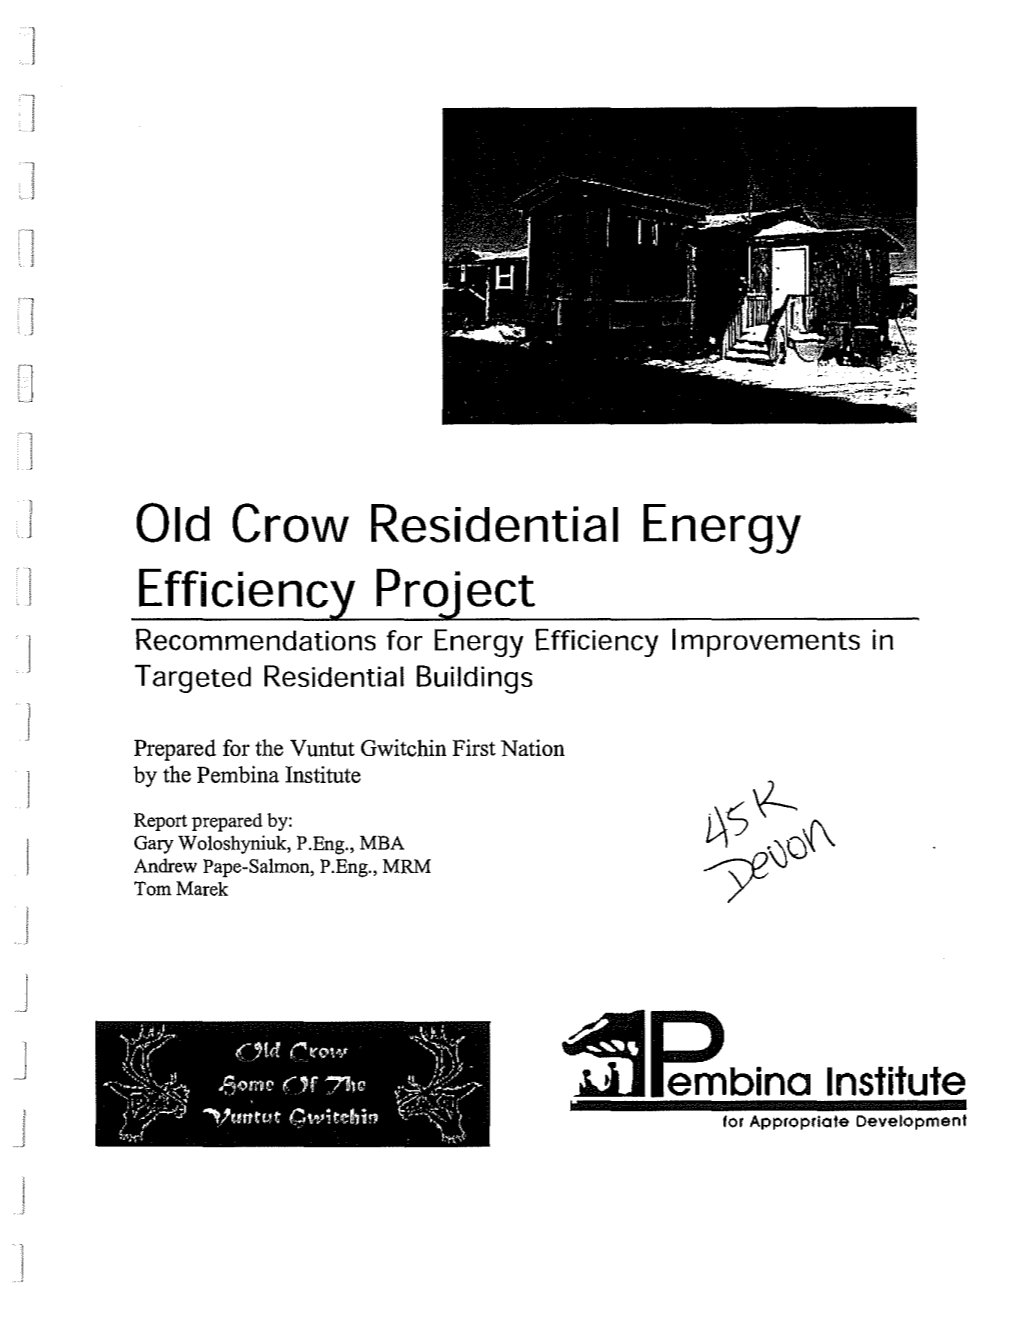 Old Crow Residential Energy Efficiency Project Pembina Institute